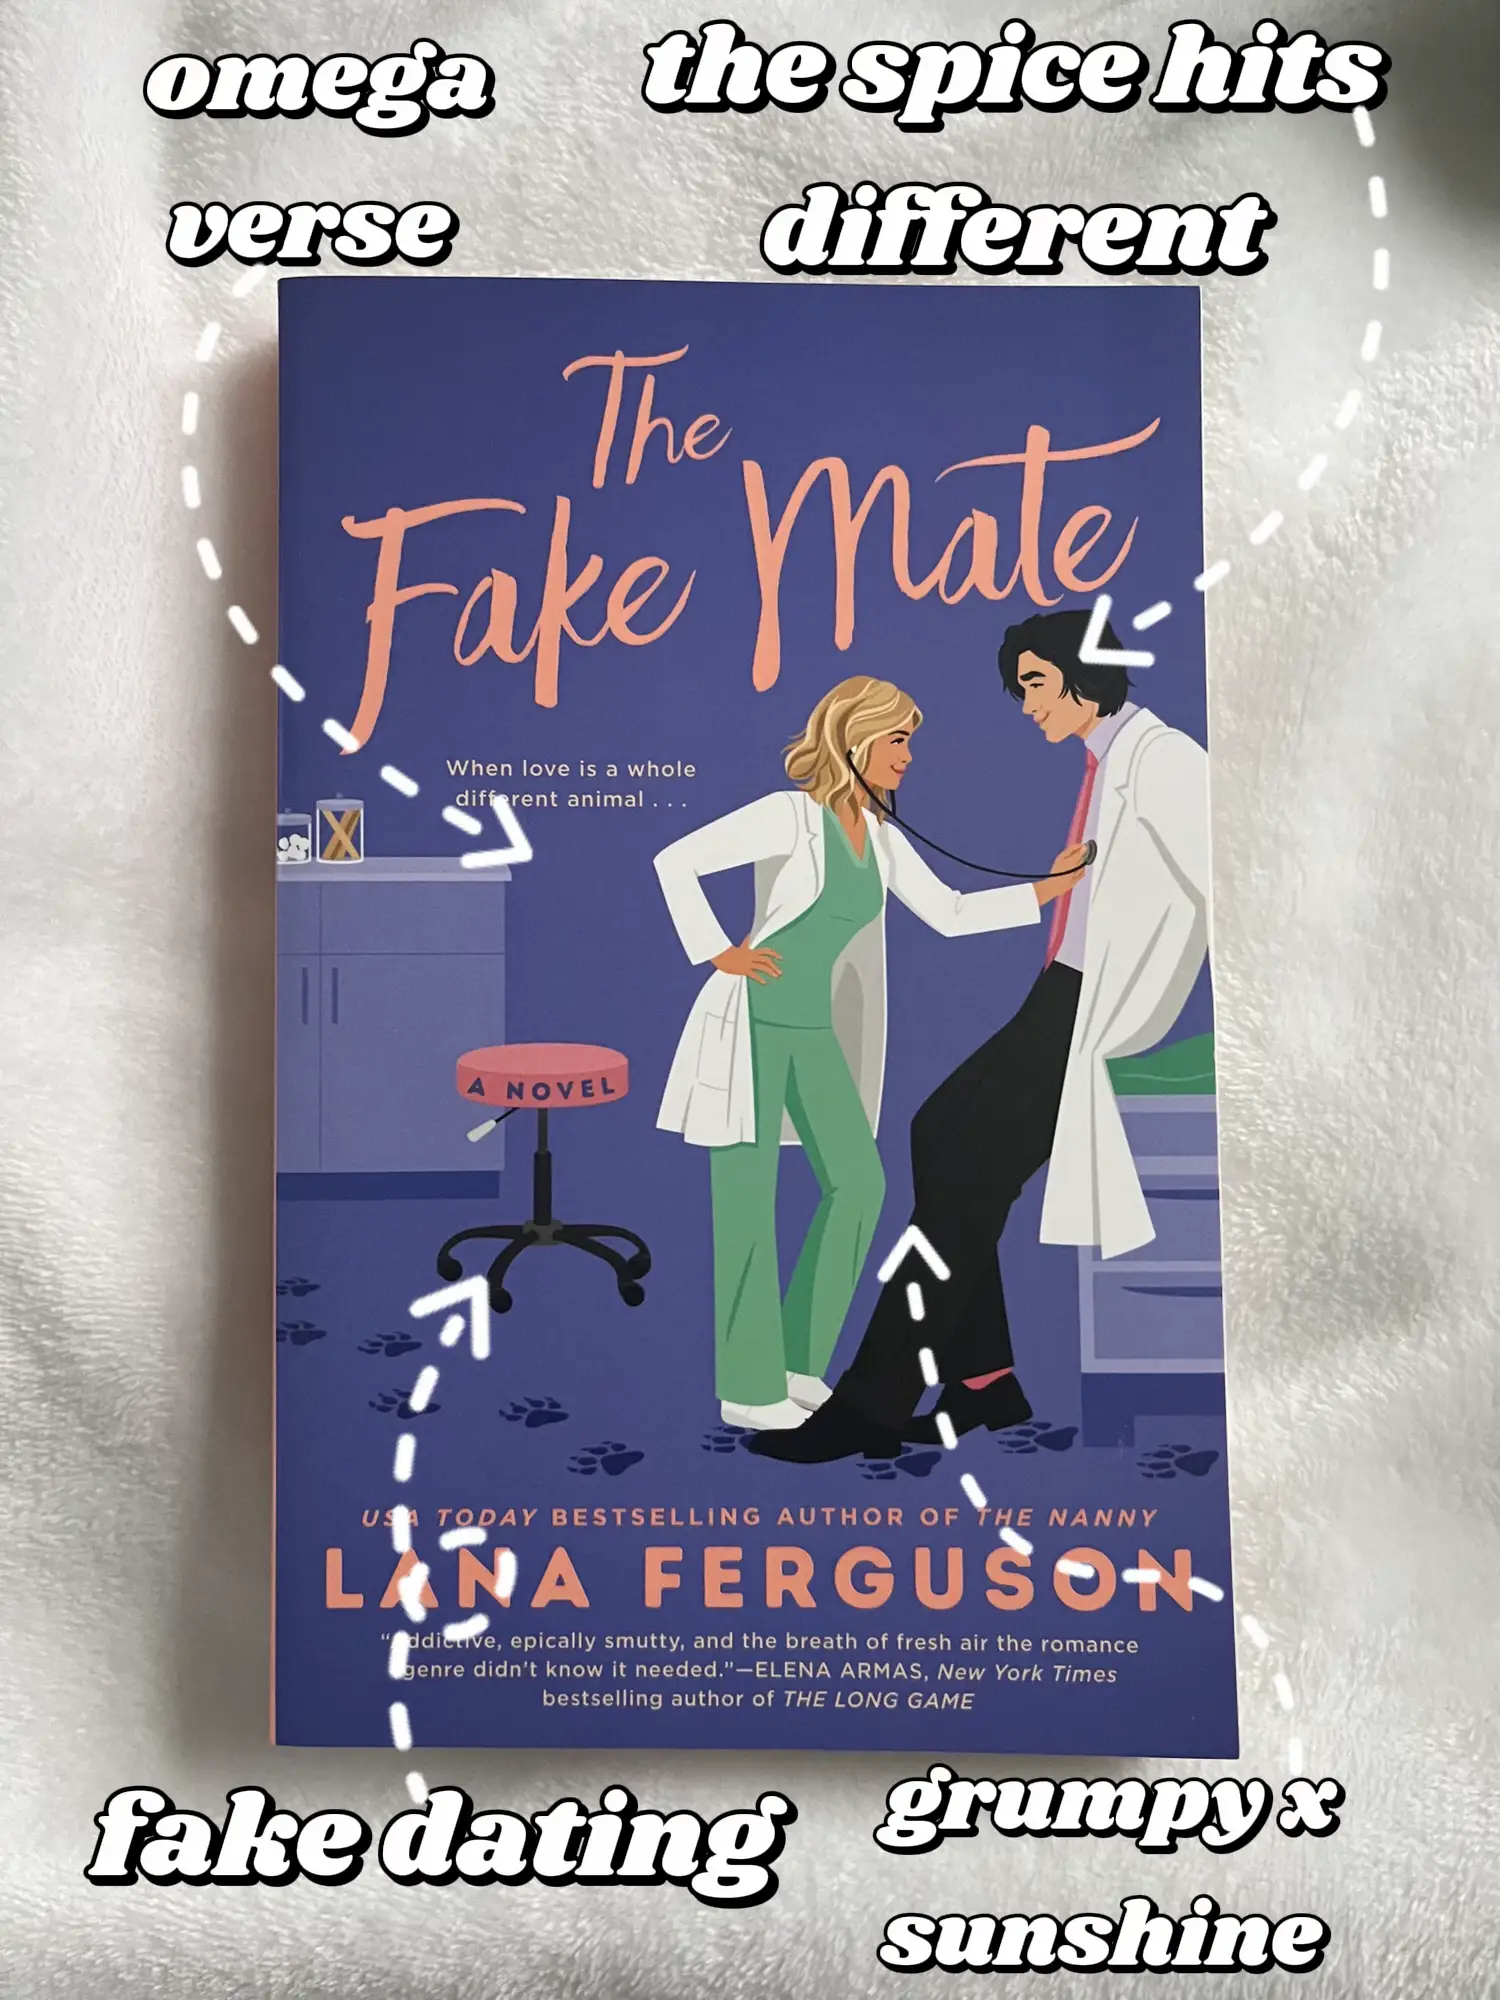  A book cover for The Fake Mate by Lana Ferguson.